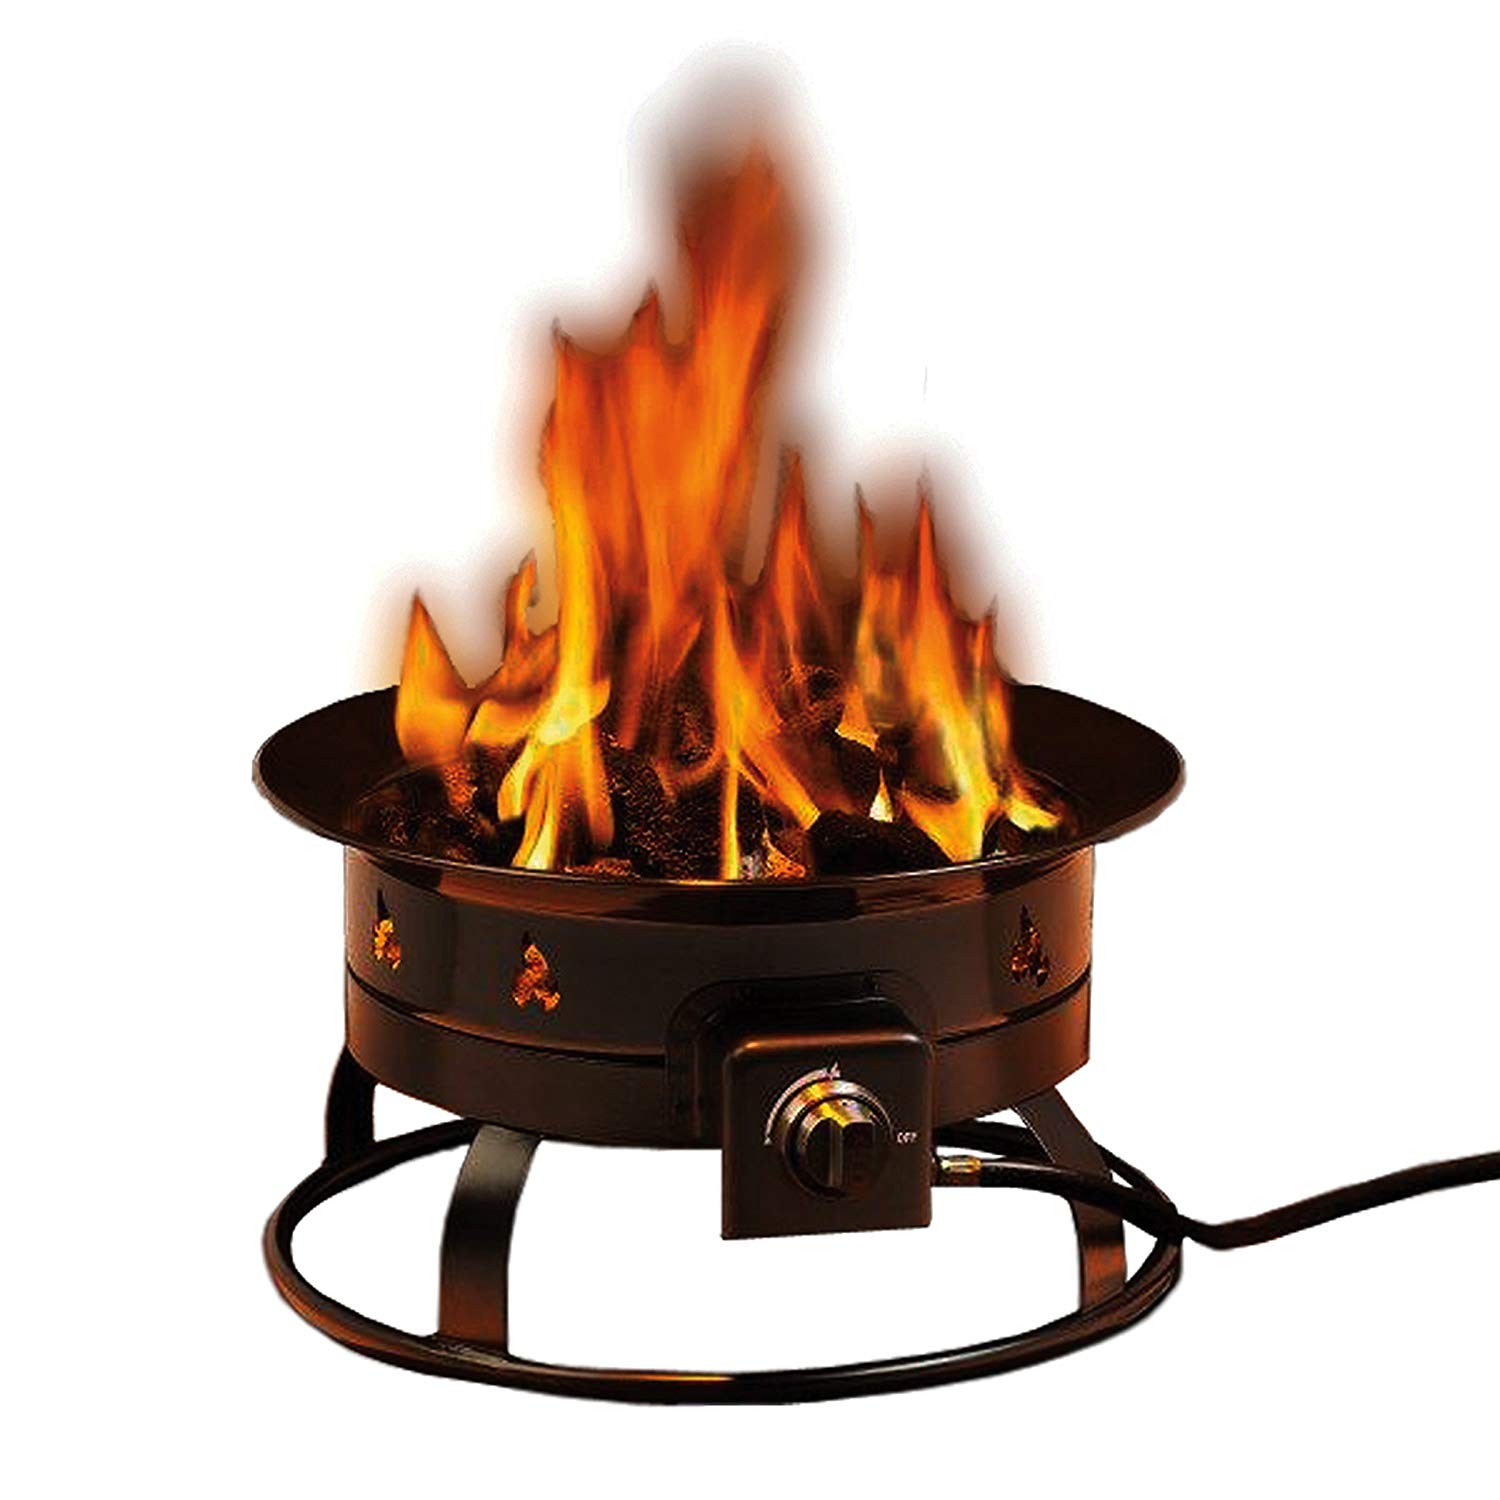 10 Best Outdoor Gas Fire Pit You Should Buy in 2019